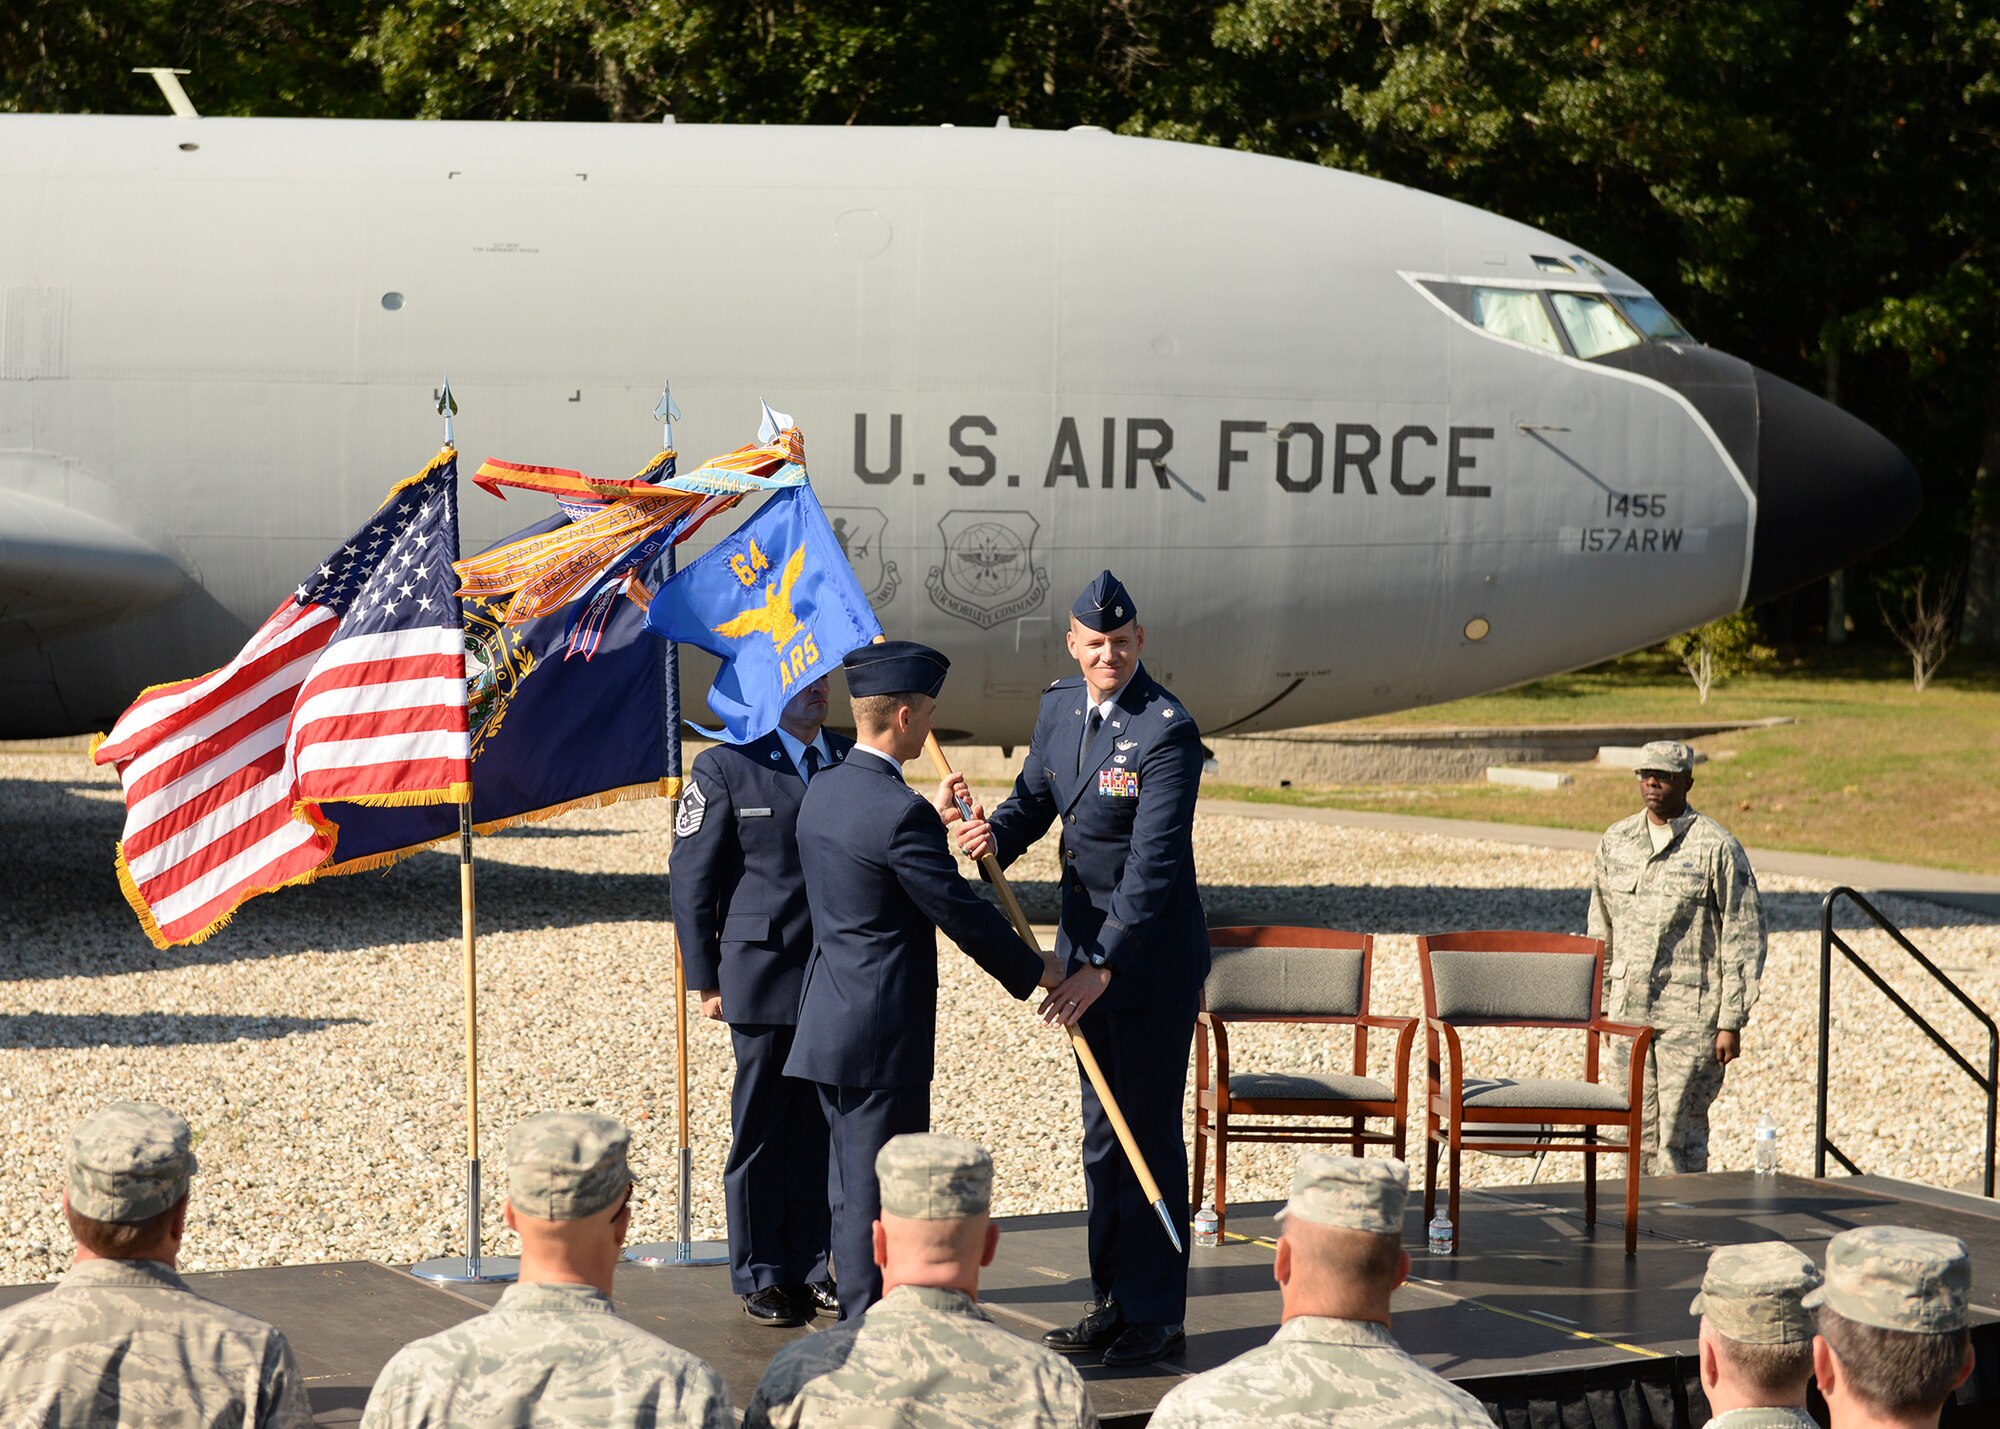 Col. Robert Hanovich Jr, commander of the 22nd Operations Group at McConnell Air Force Base, passes the 64th Air Refueling Squadron guidon to Lt. Col. Kevin Eley, who assumed command of the 64th ARS during a ceremony, Sept. 24, at Pease Air National Guard Base. (Photo by Master Sgt. Thomas Johnson, 157th ARW Public Affairs)